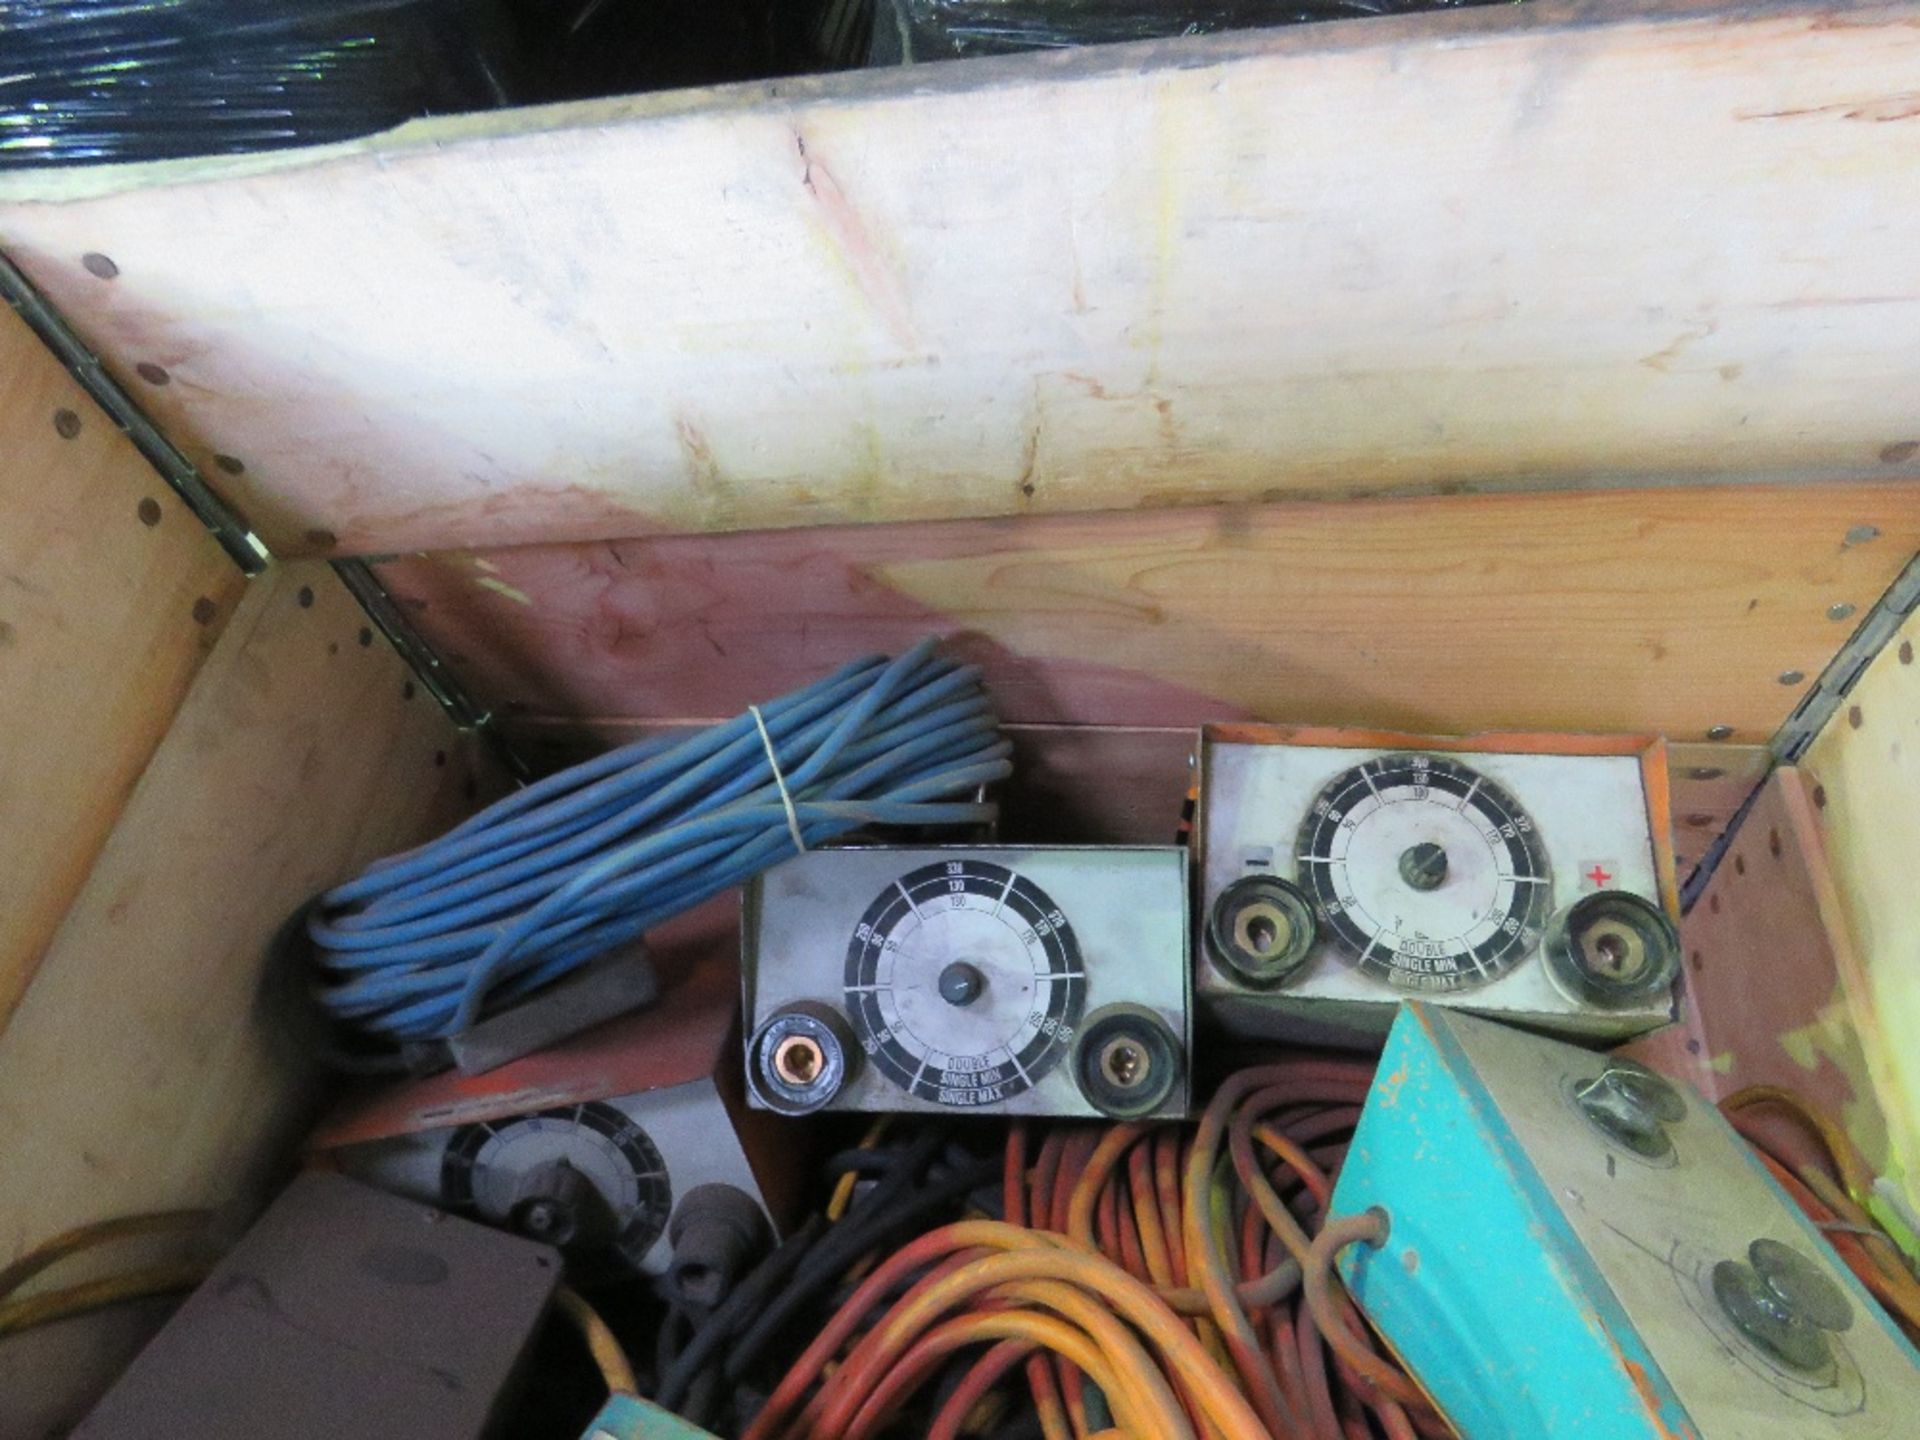 STILLAGE OF WELDING LEADS AND CONTROLLERS ETC. - Image 2 of 7